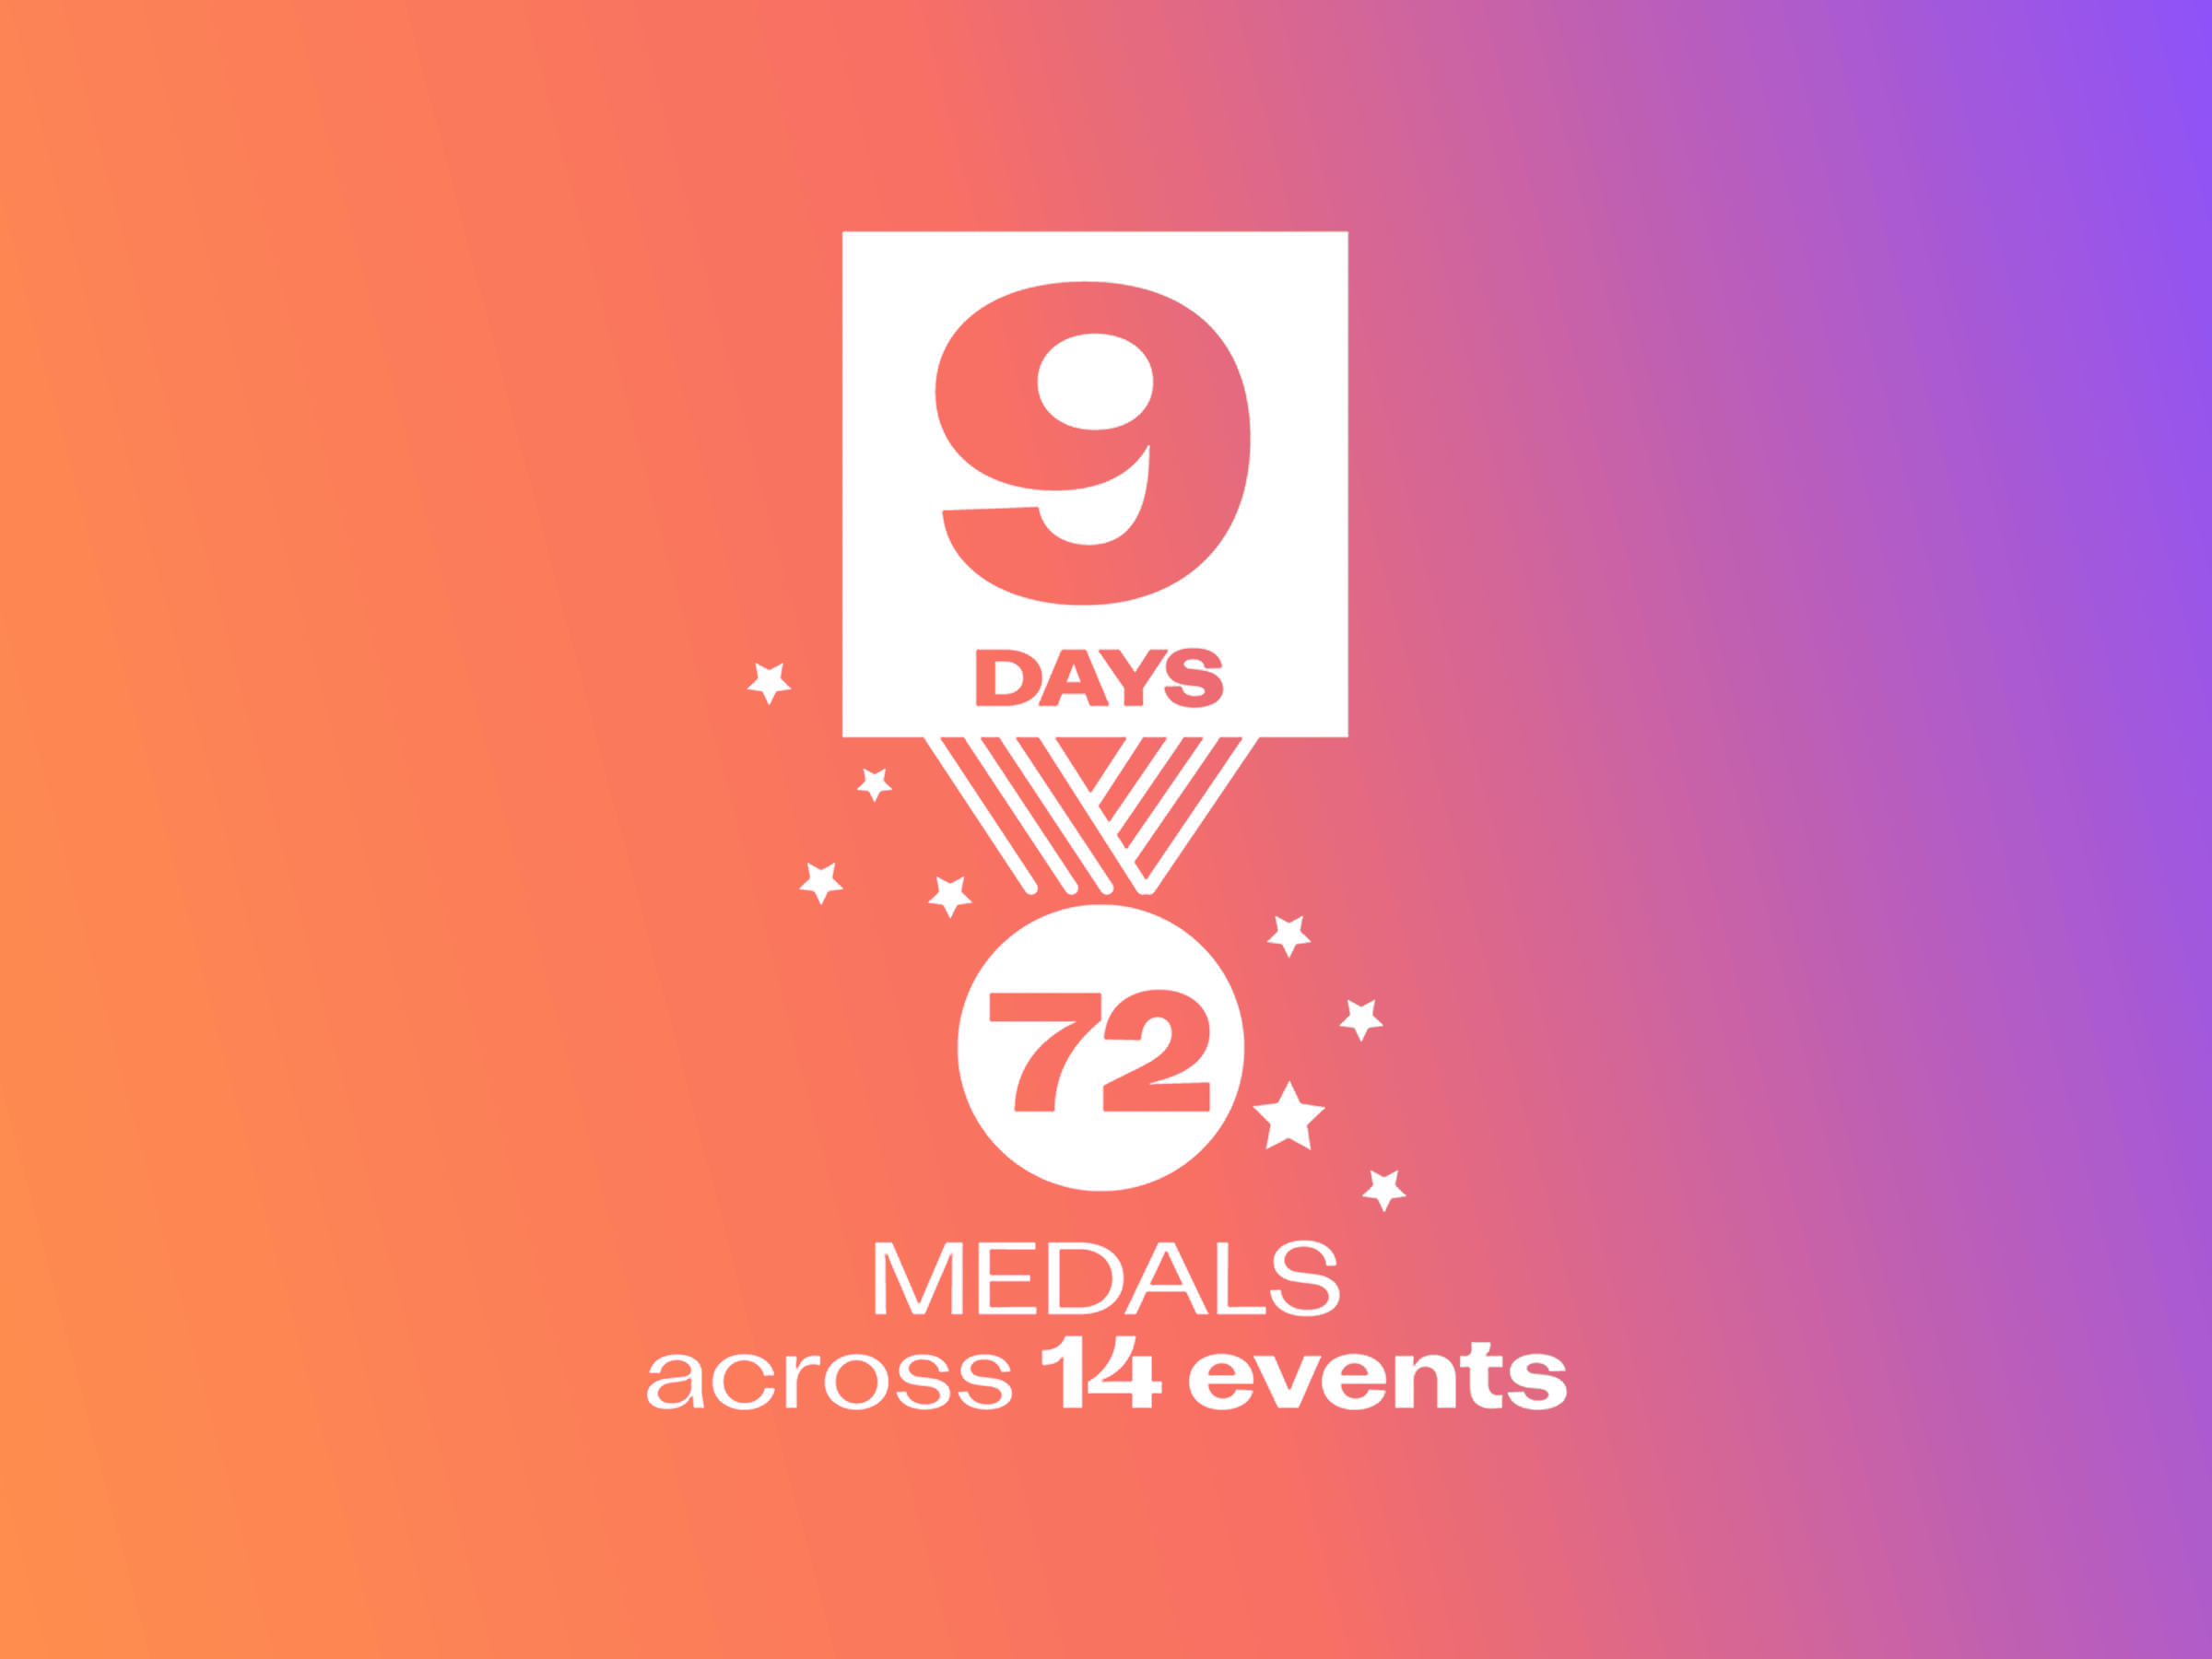 9 days - 72 medals across 14 events